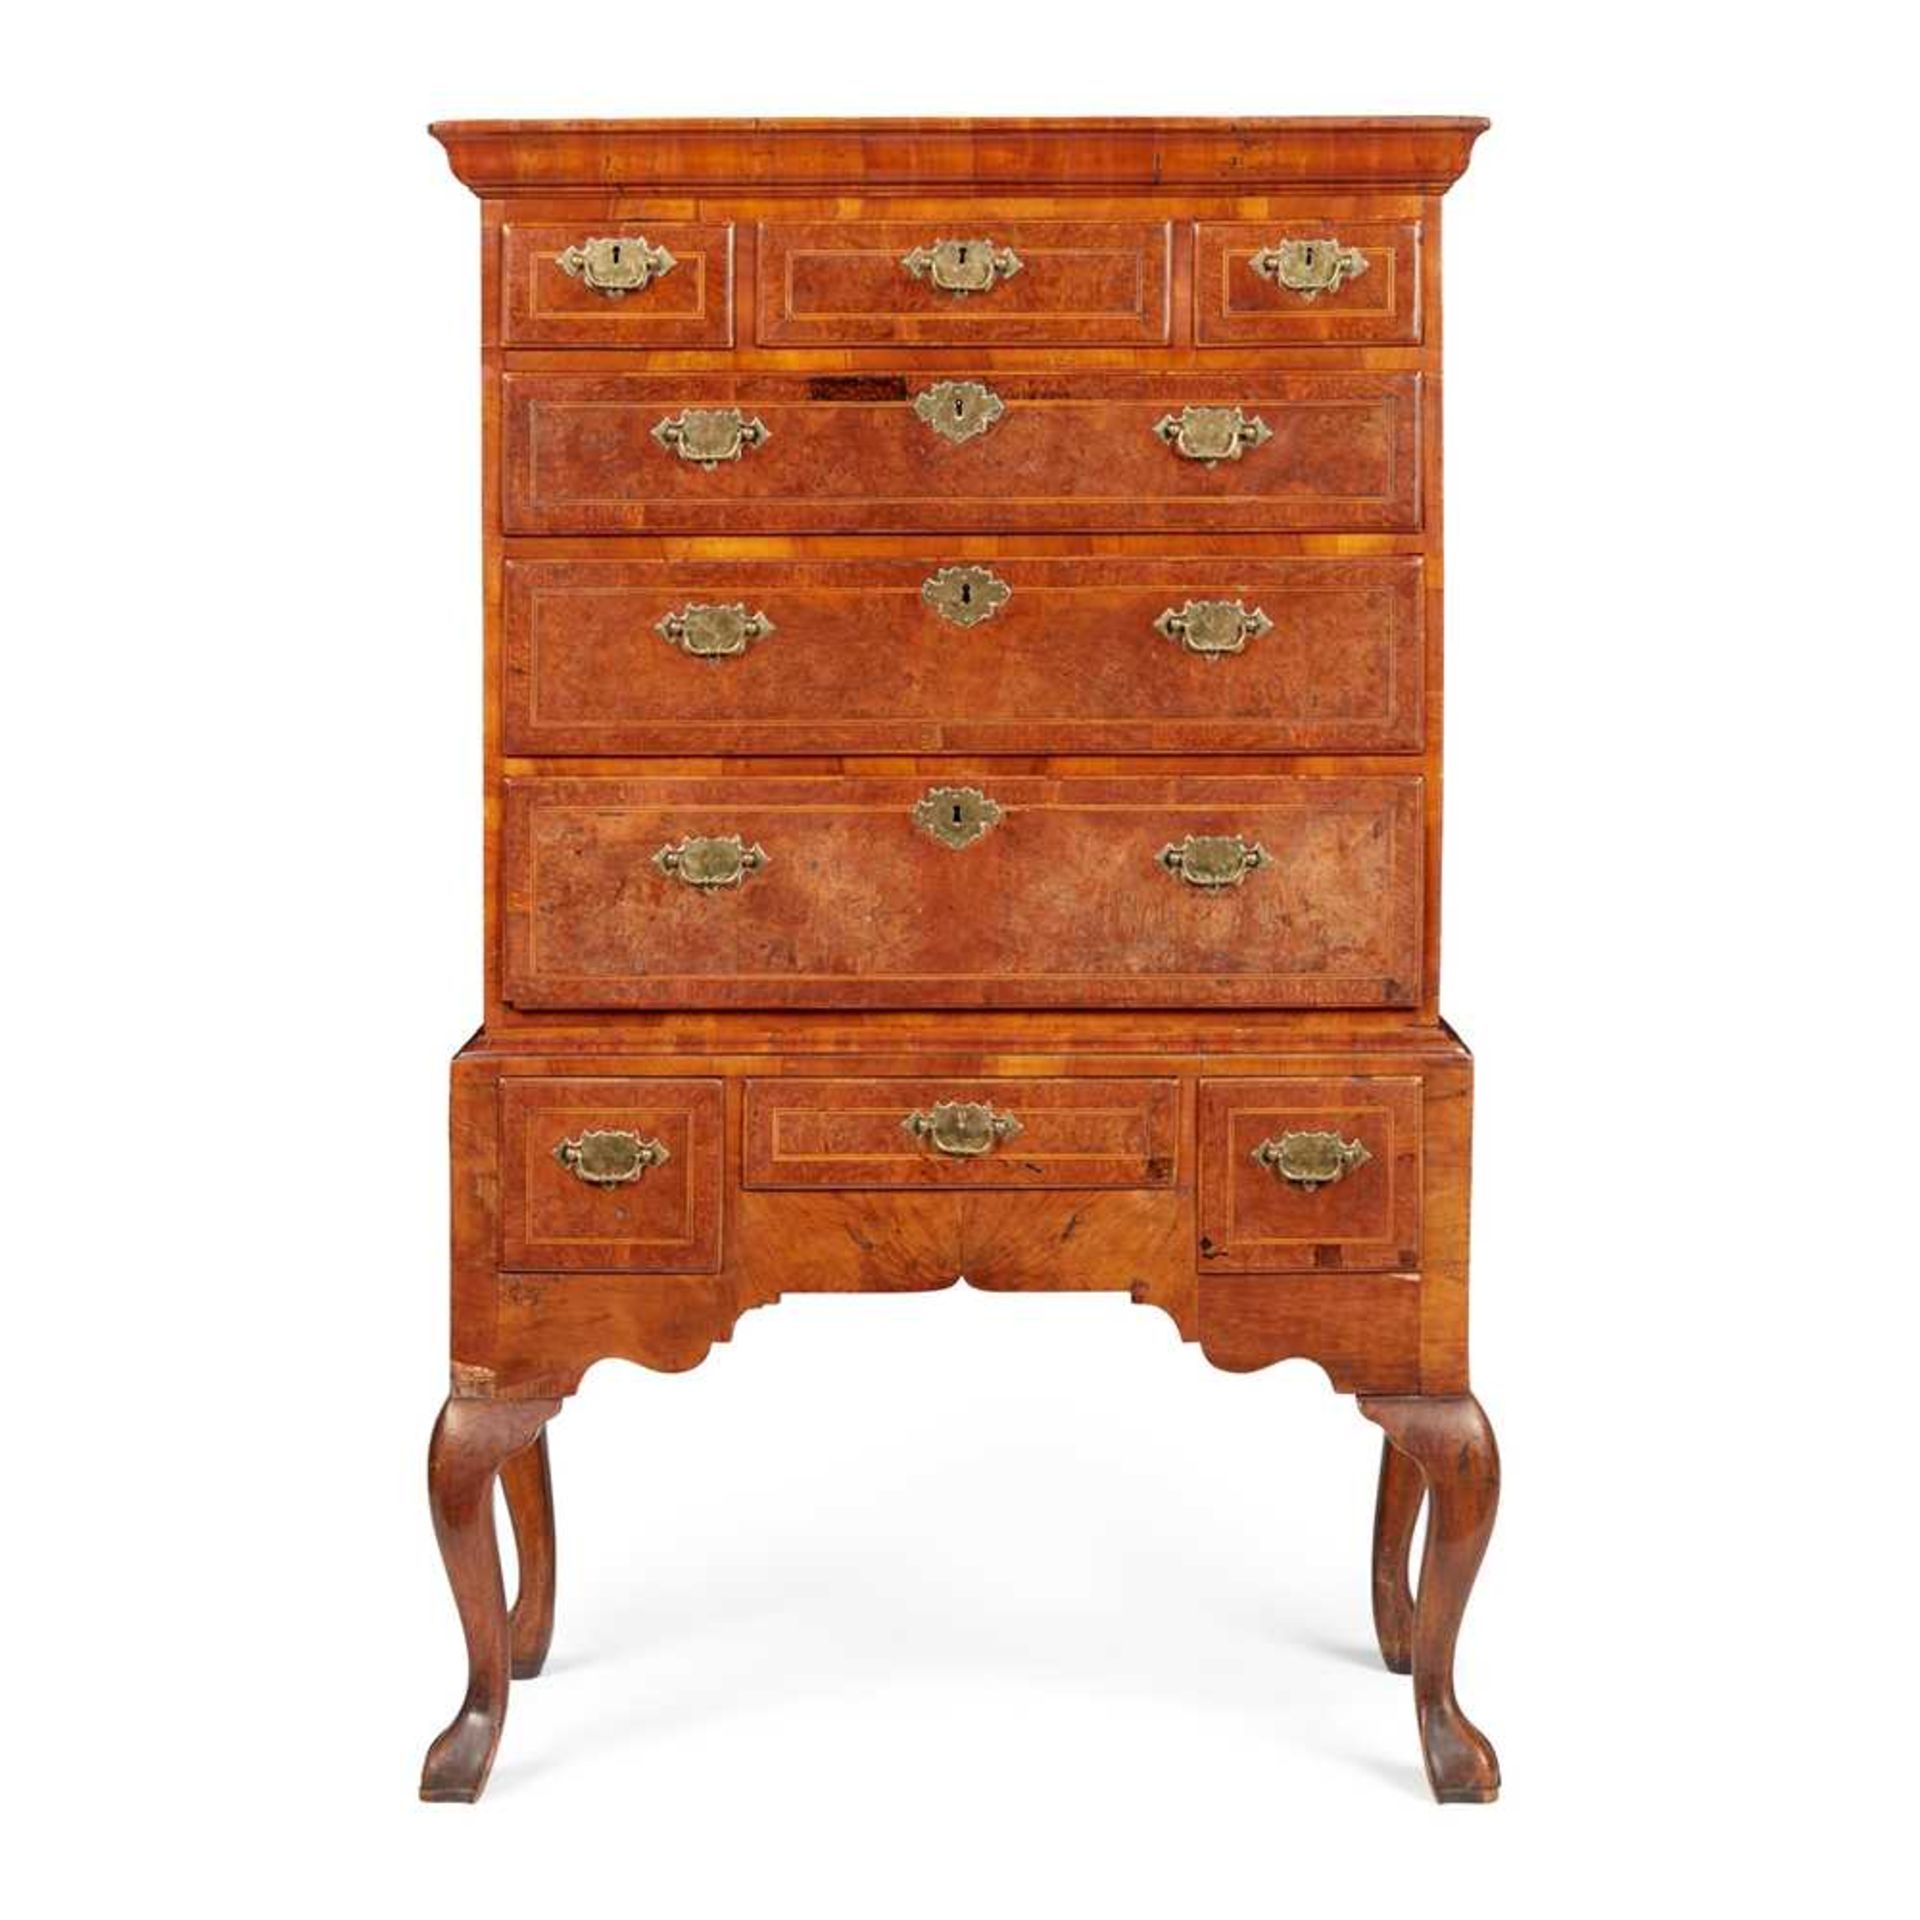 GEORGE II BURR WALNUT AND WALNUT CHEST-ON-STAND EARLY 18TH CENTURY